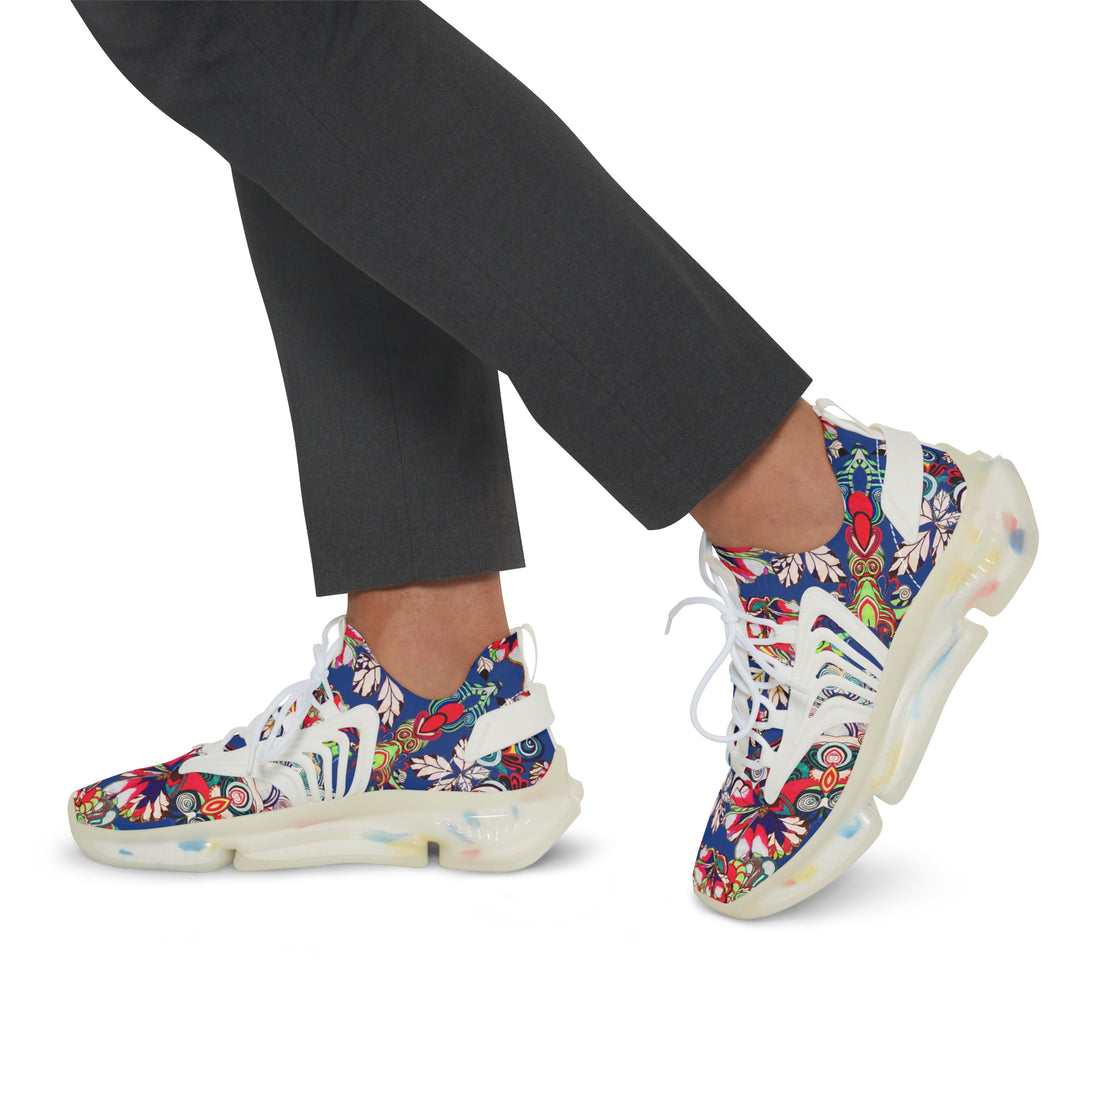 royal blue graphic floral print mesh knit sneakers